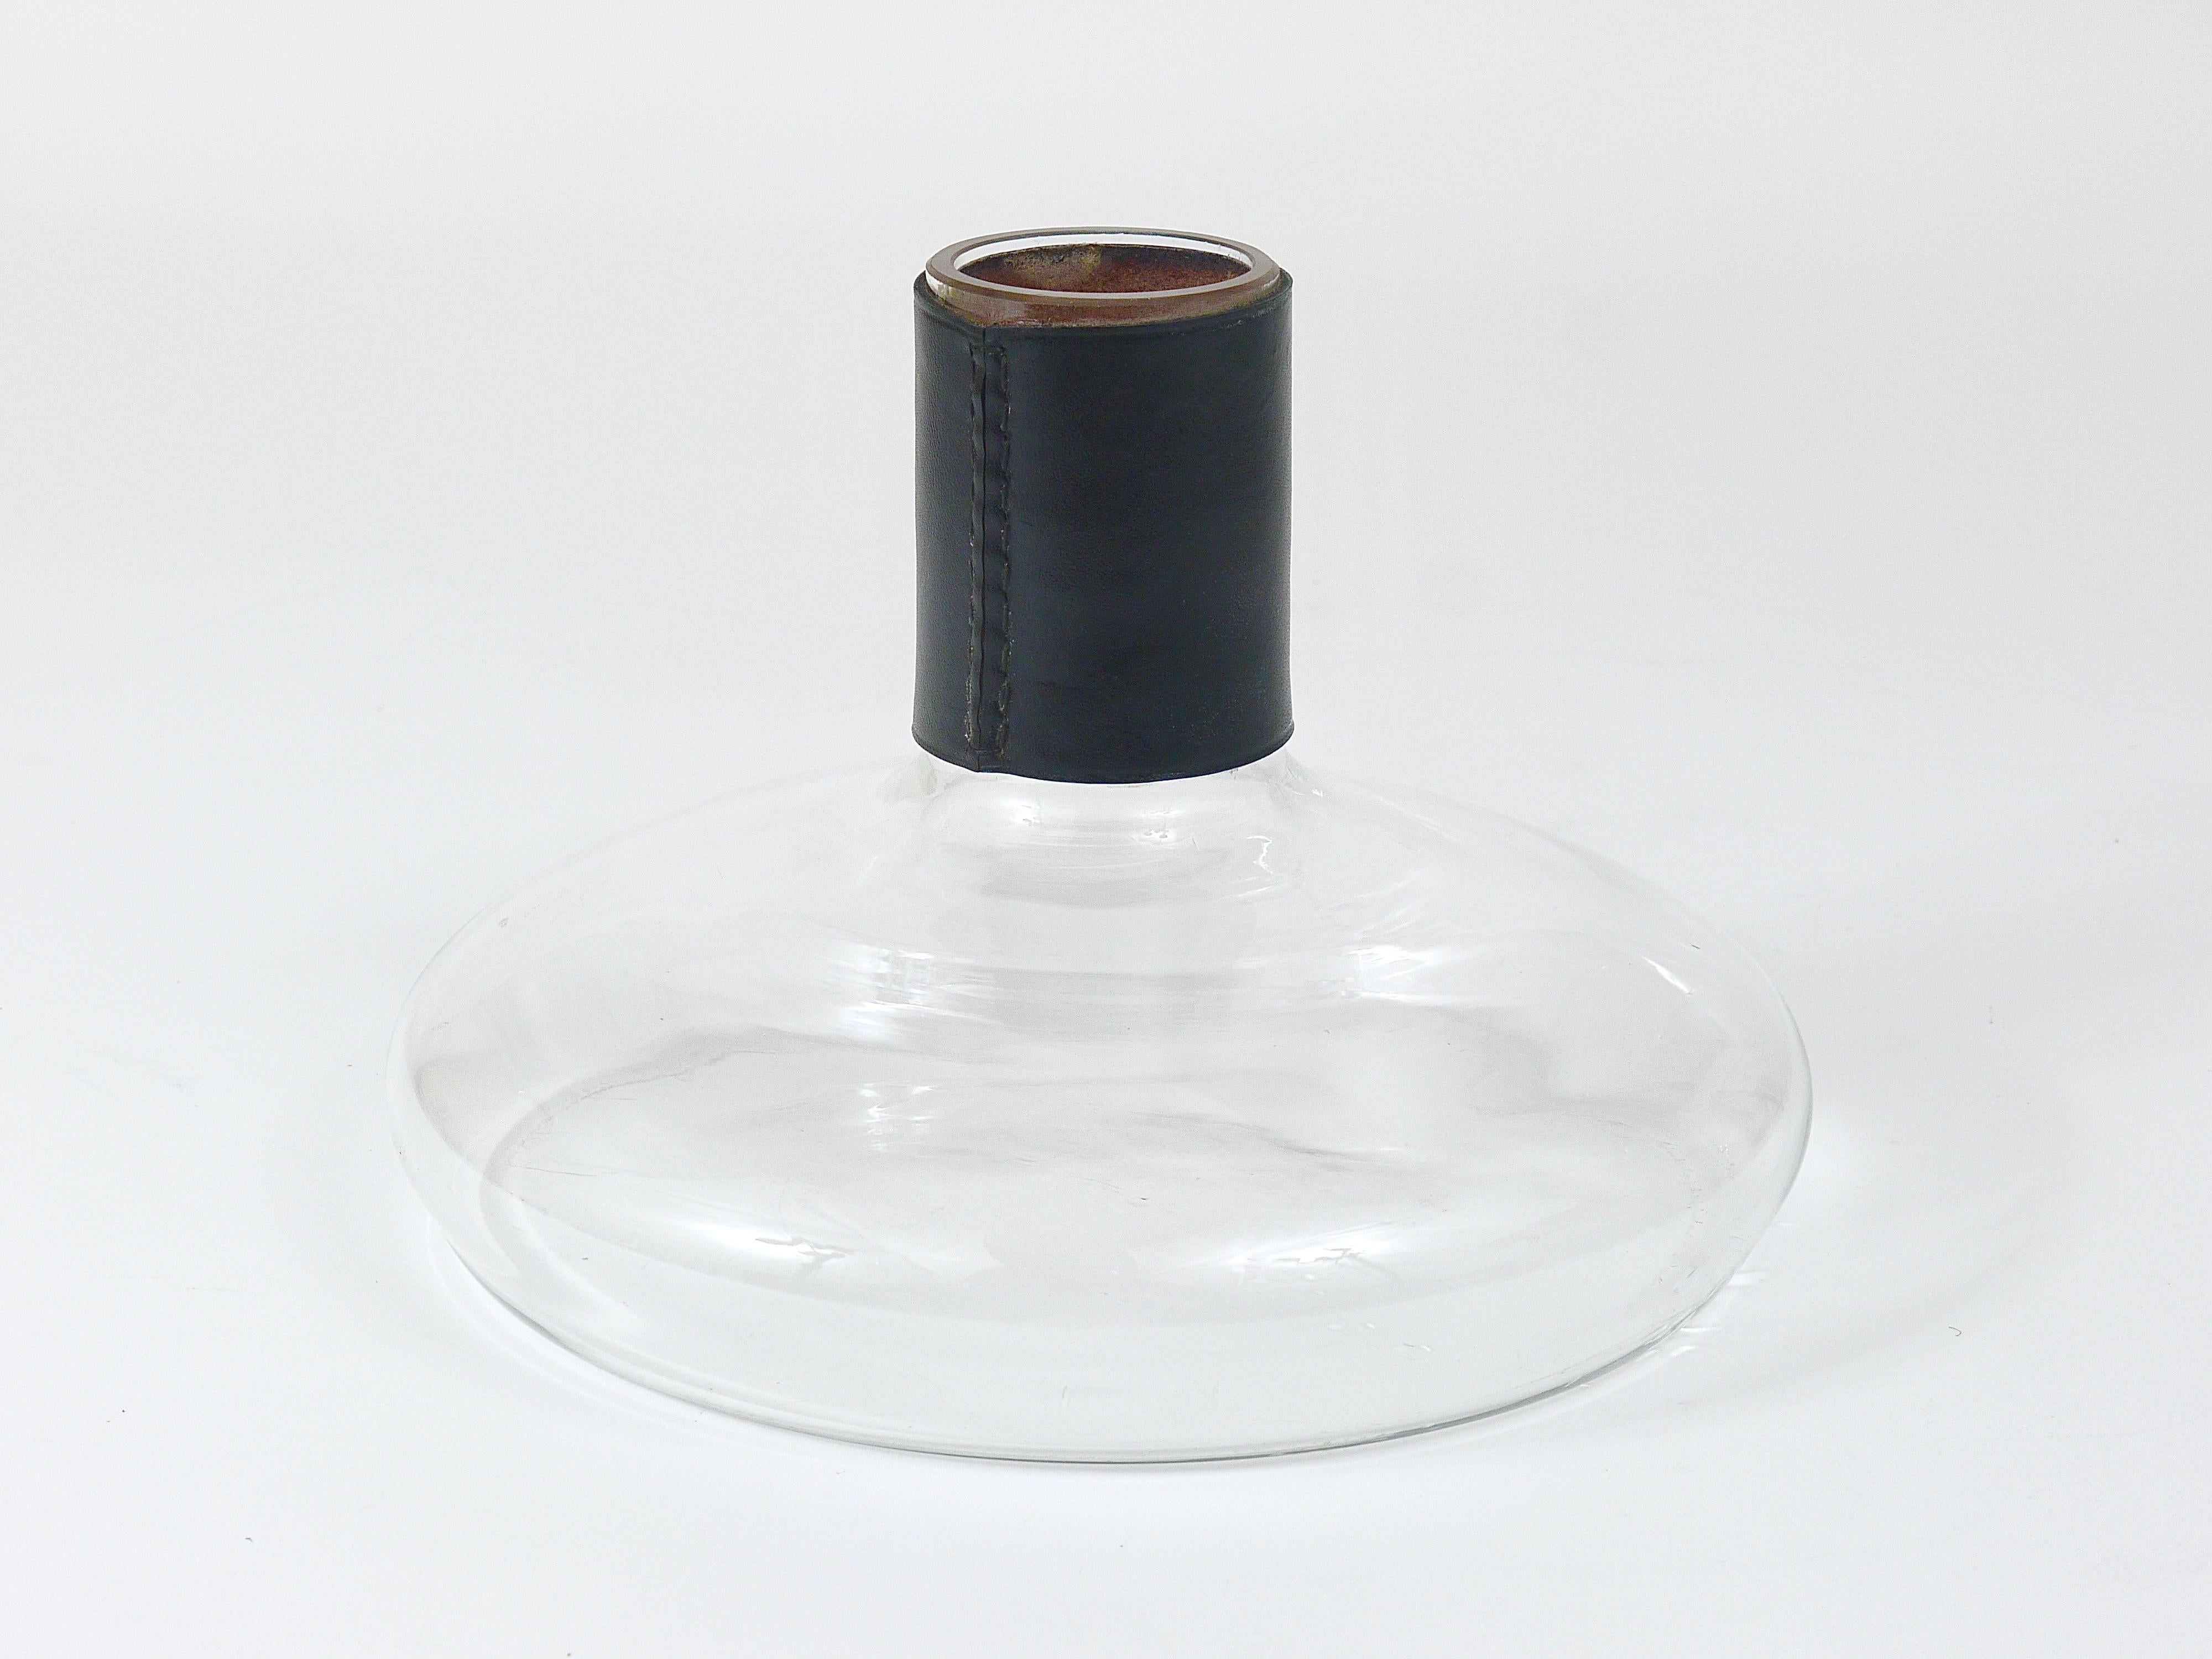 Carl Aubock Vase or Decanter with Black Leather Top, Midcentury, Austria, 1950s For Sale 3